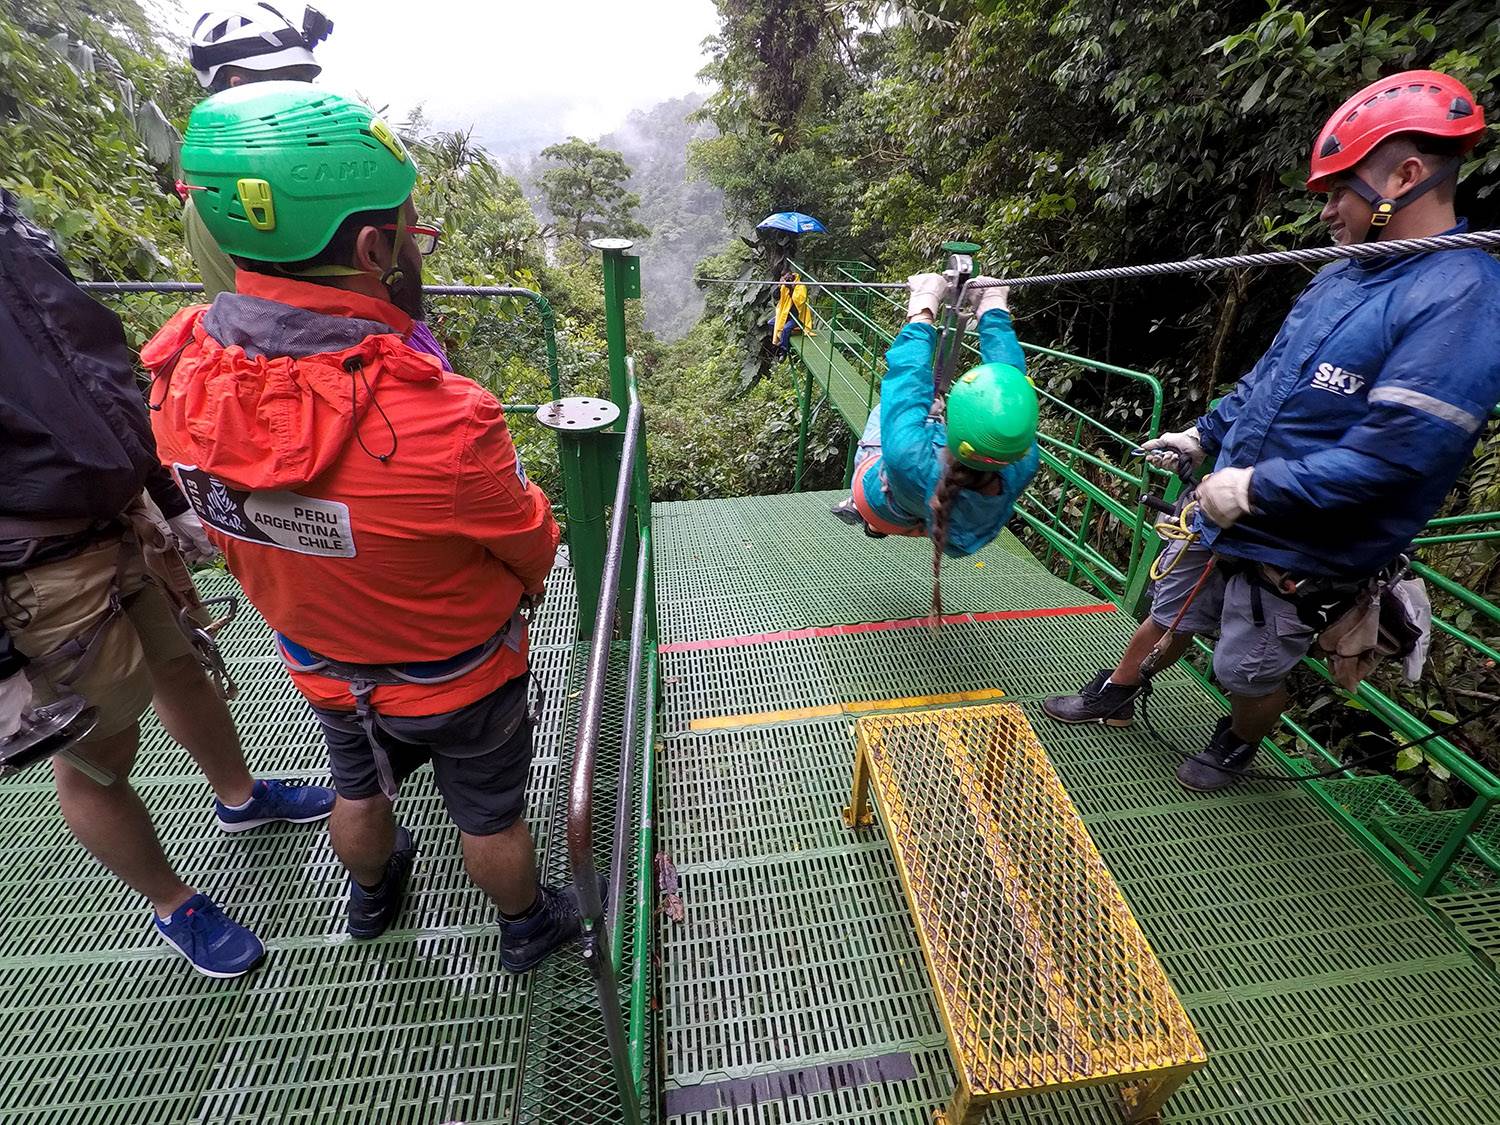 Things to do in Arenal Costa Rica Zip lining